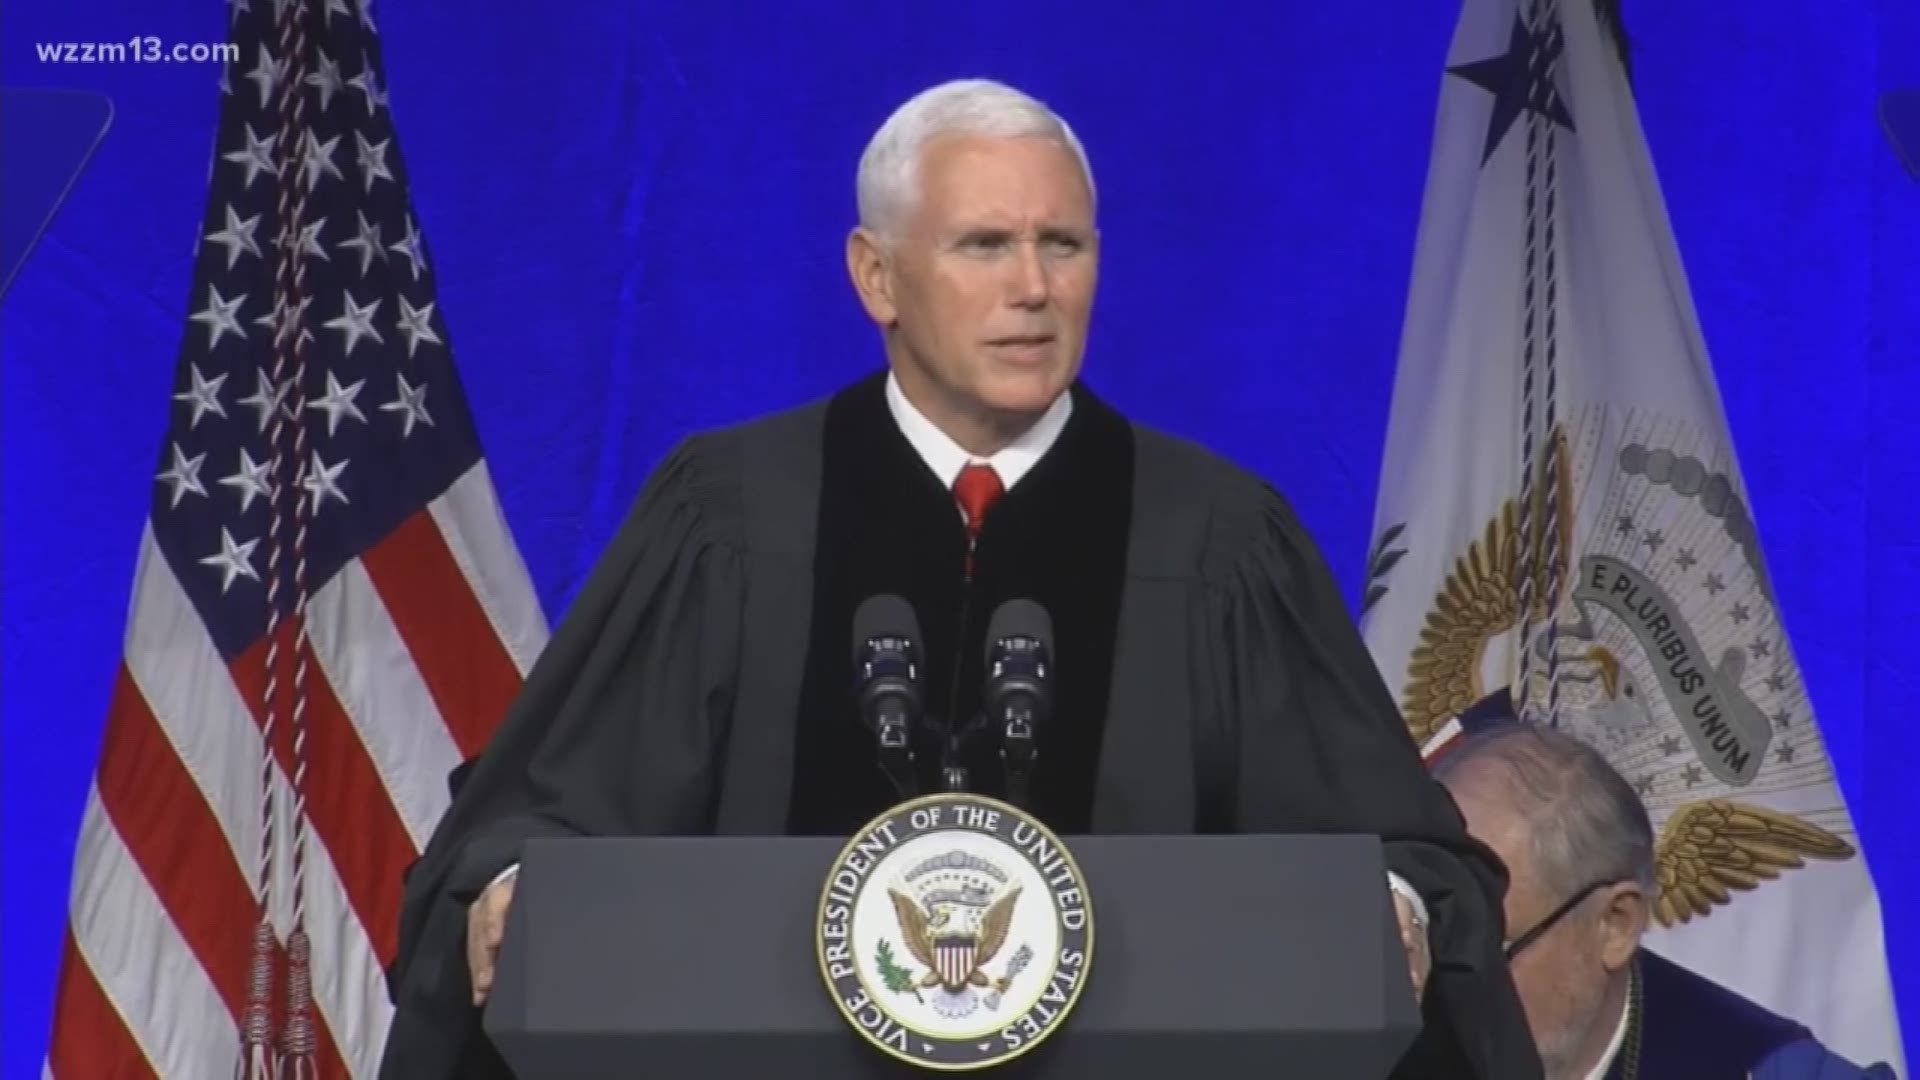 Pence spoke at commencement in Michigan